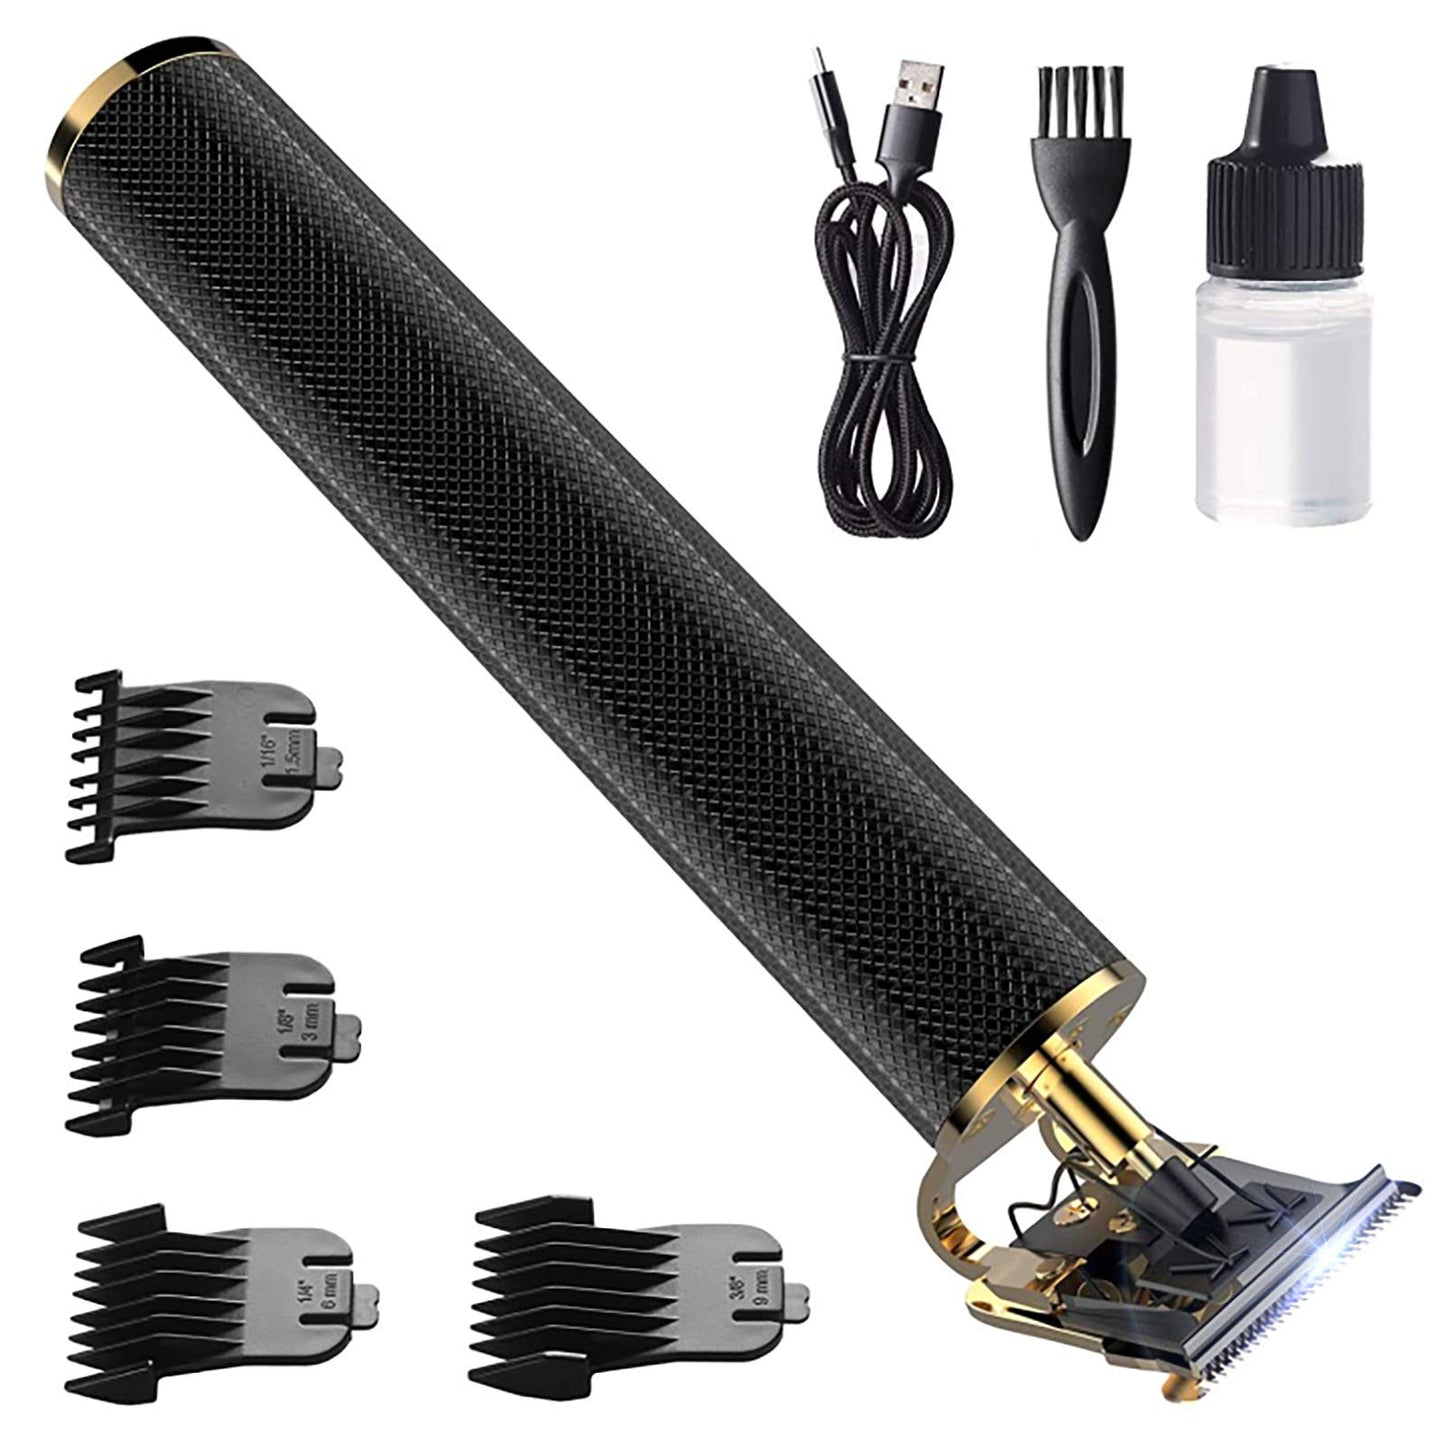 Men Hair Clippers, Professional Outliner Hair Trimmer Cordless, Mens Beard Trimmer, Wireless Hair Cutting Kit for Barbers, USB Rechargeable, Black and Gold Amazon Platform Banned - Bargains4PenniesMen Hair Clippers, Professional Outliner Hair Trimmer Cordless, Mens Beard Trimmer, Wireless Hair Cutting Kit for Barbers, USB Rechargeable, Black and Gold Amazon Platform BannedBargains4Pennies